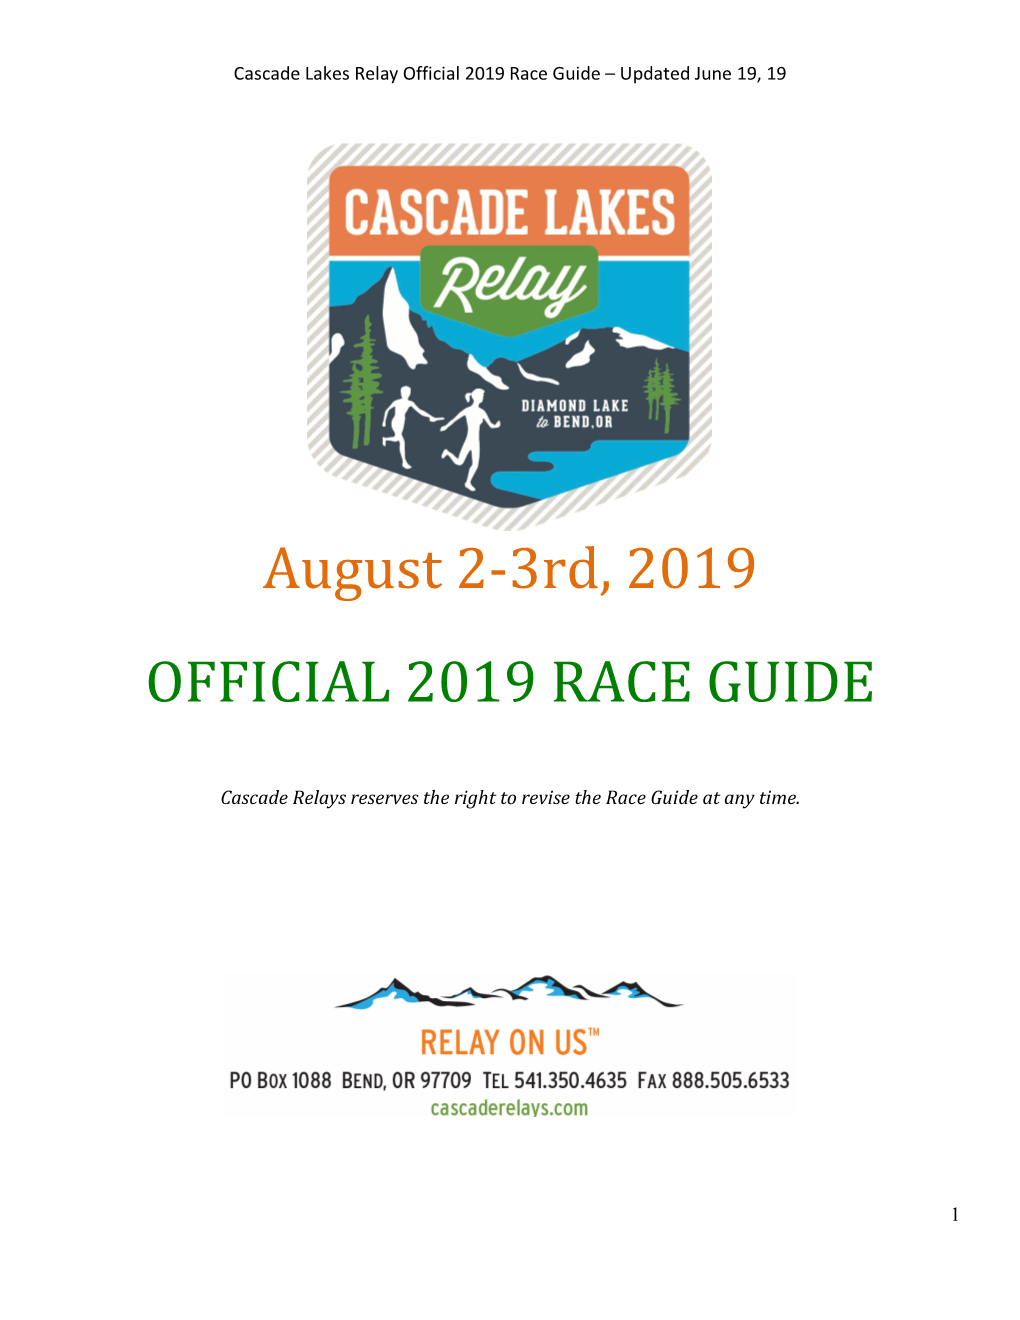 August 2-3Rd, 2019 OFFICIAL 2019 RACE GUIDE